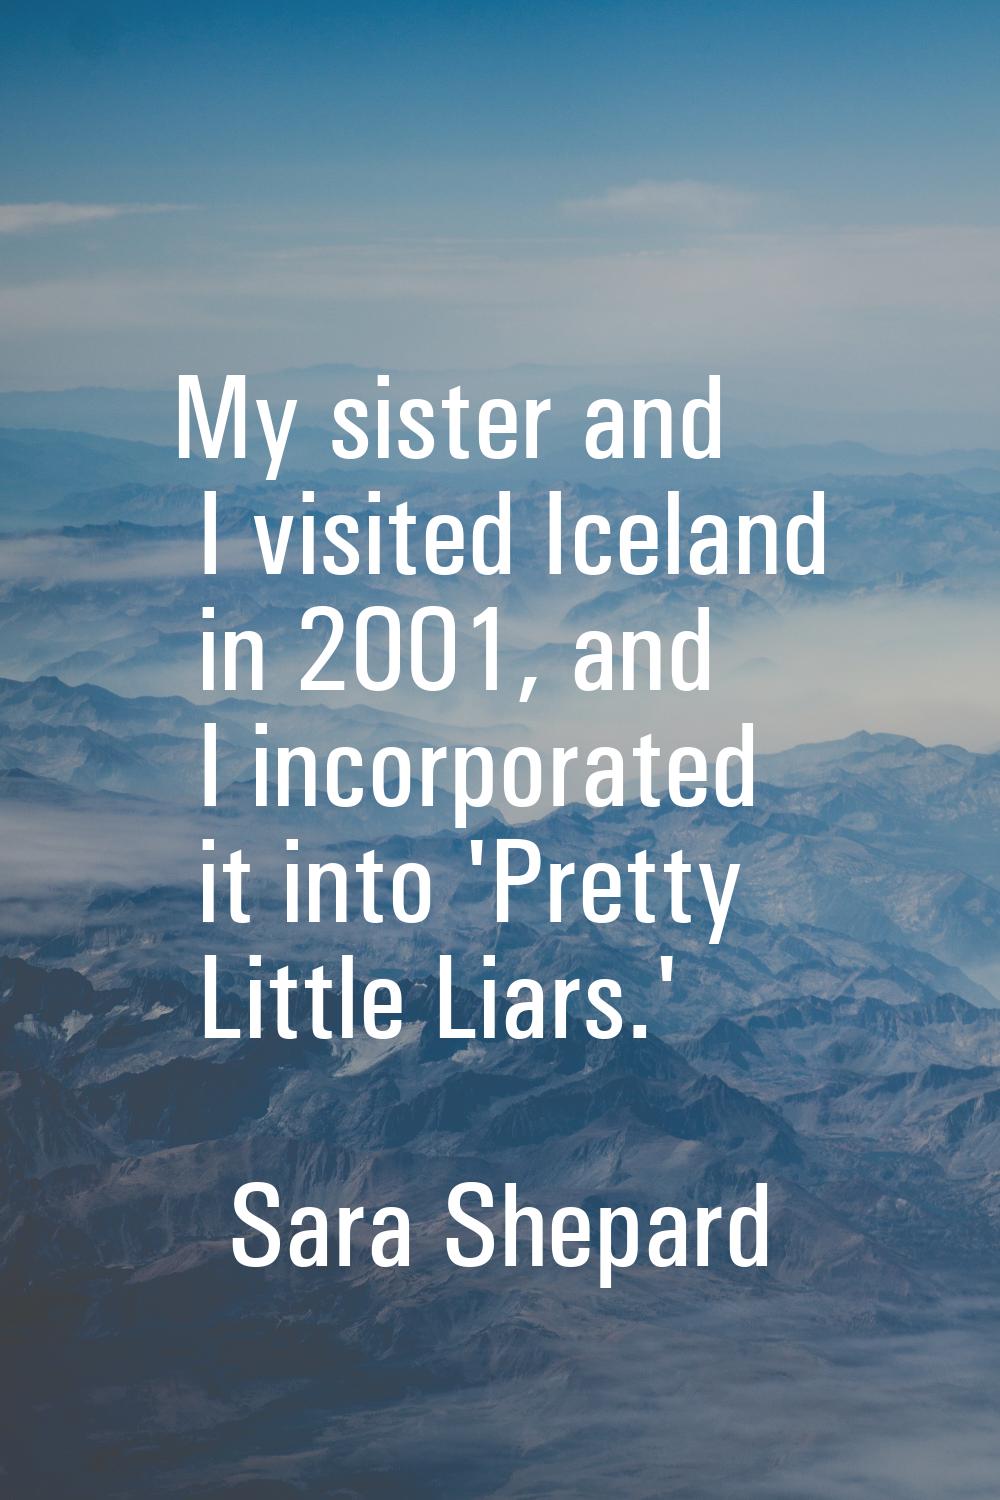 My sister and I visited Iceland in 2001, and I incorporated it into 'Pretty Little Liars.'